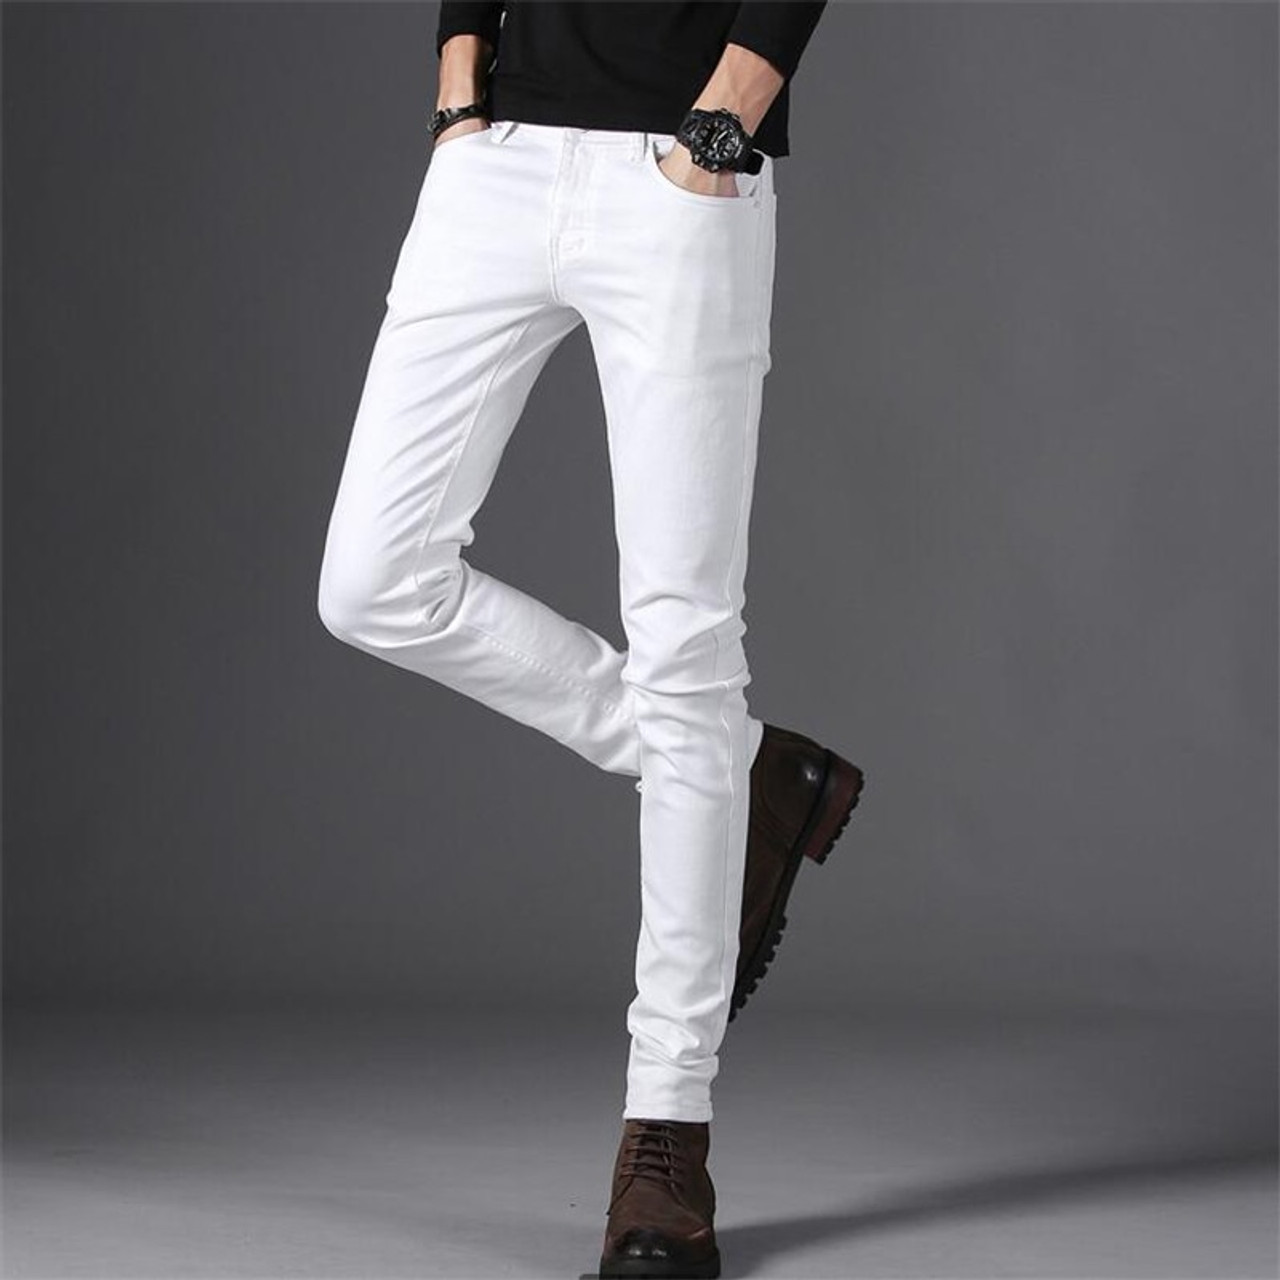 mens jeans casual